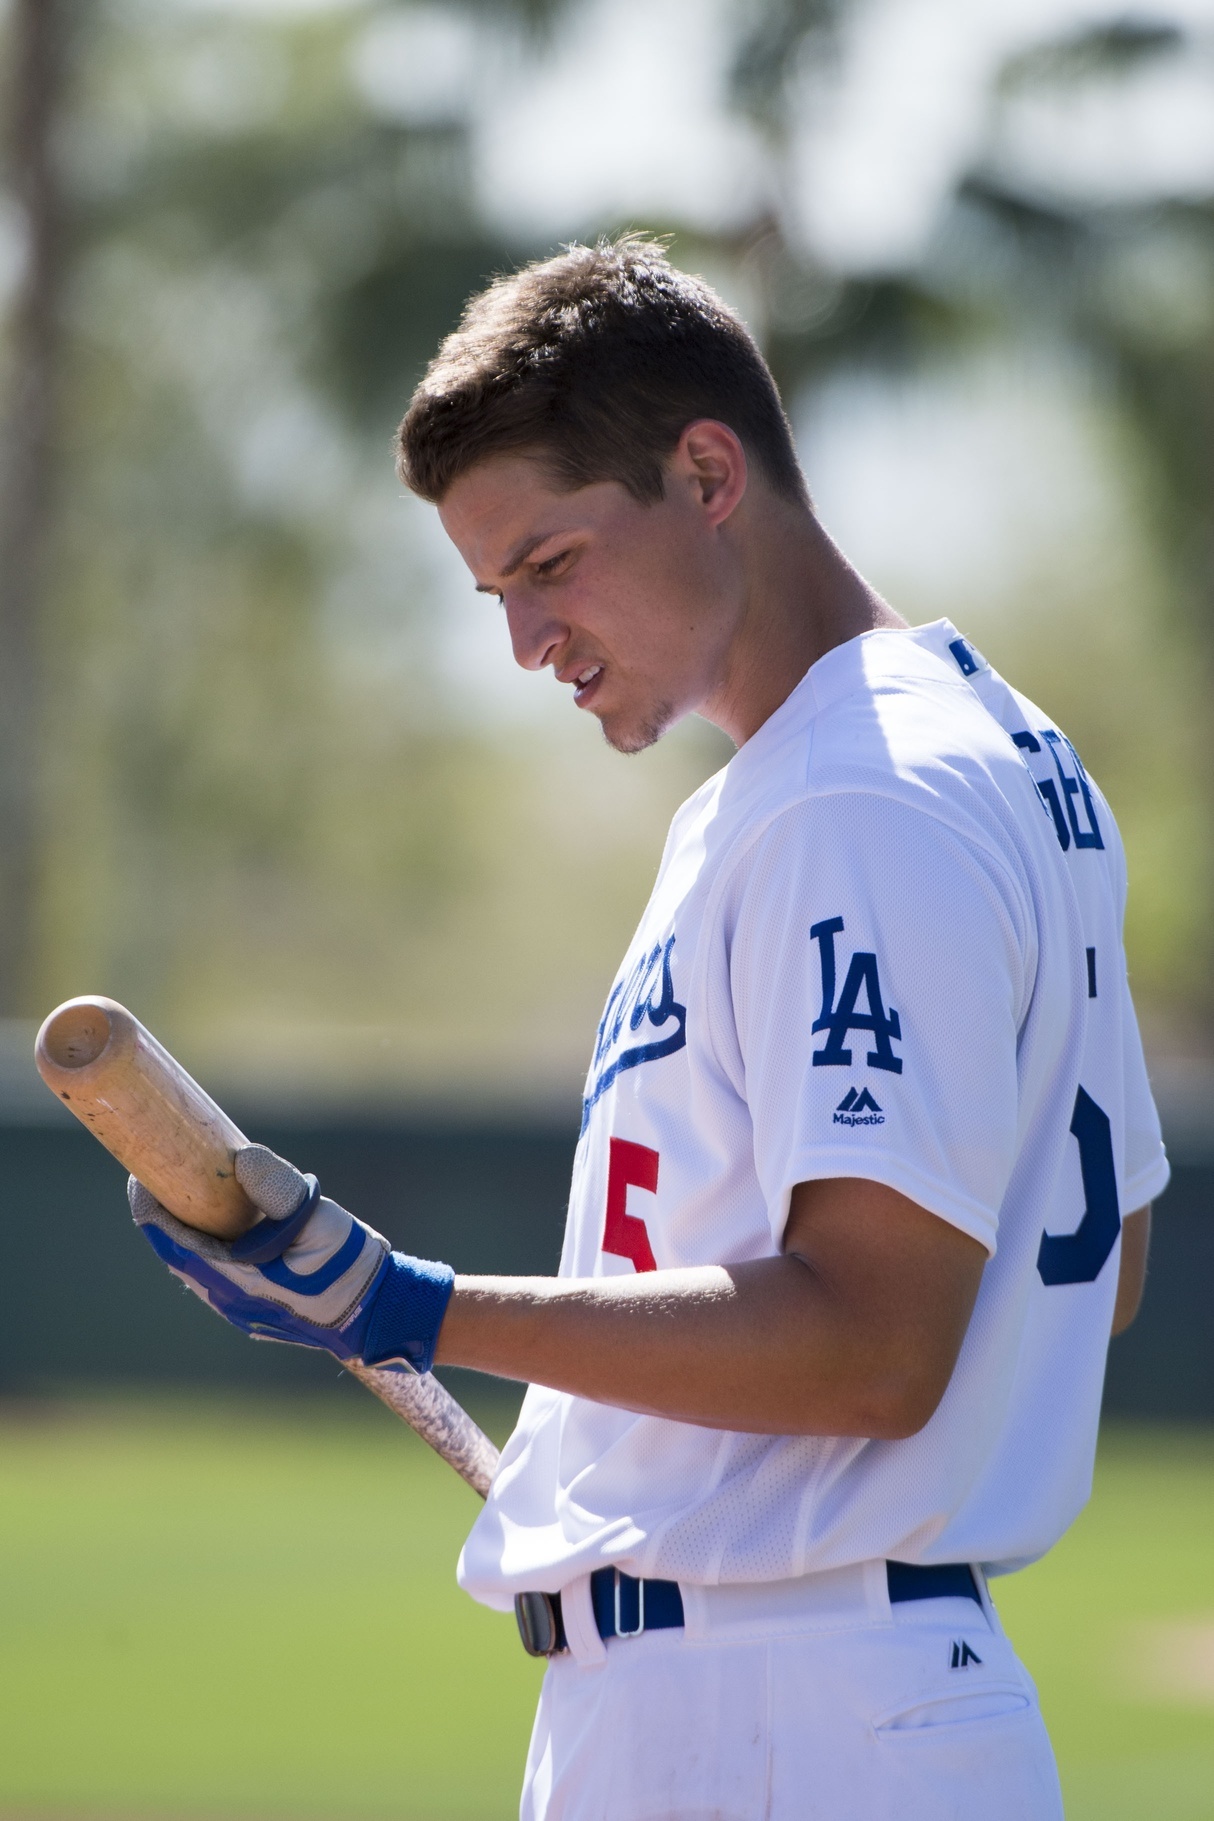 Dodgers: Corey Seager is this generation's Derek Jeter but better